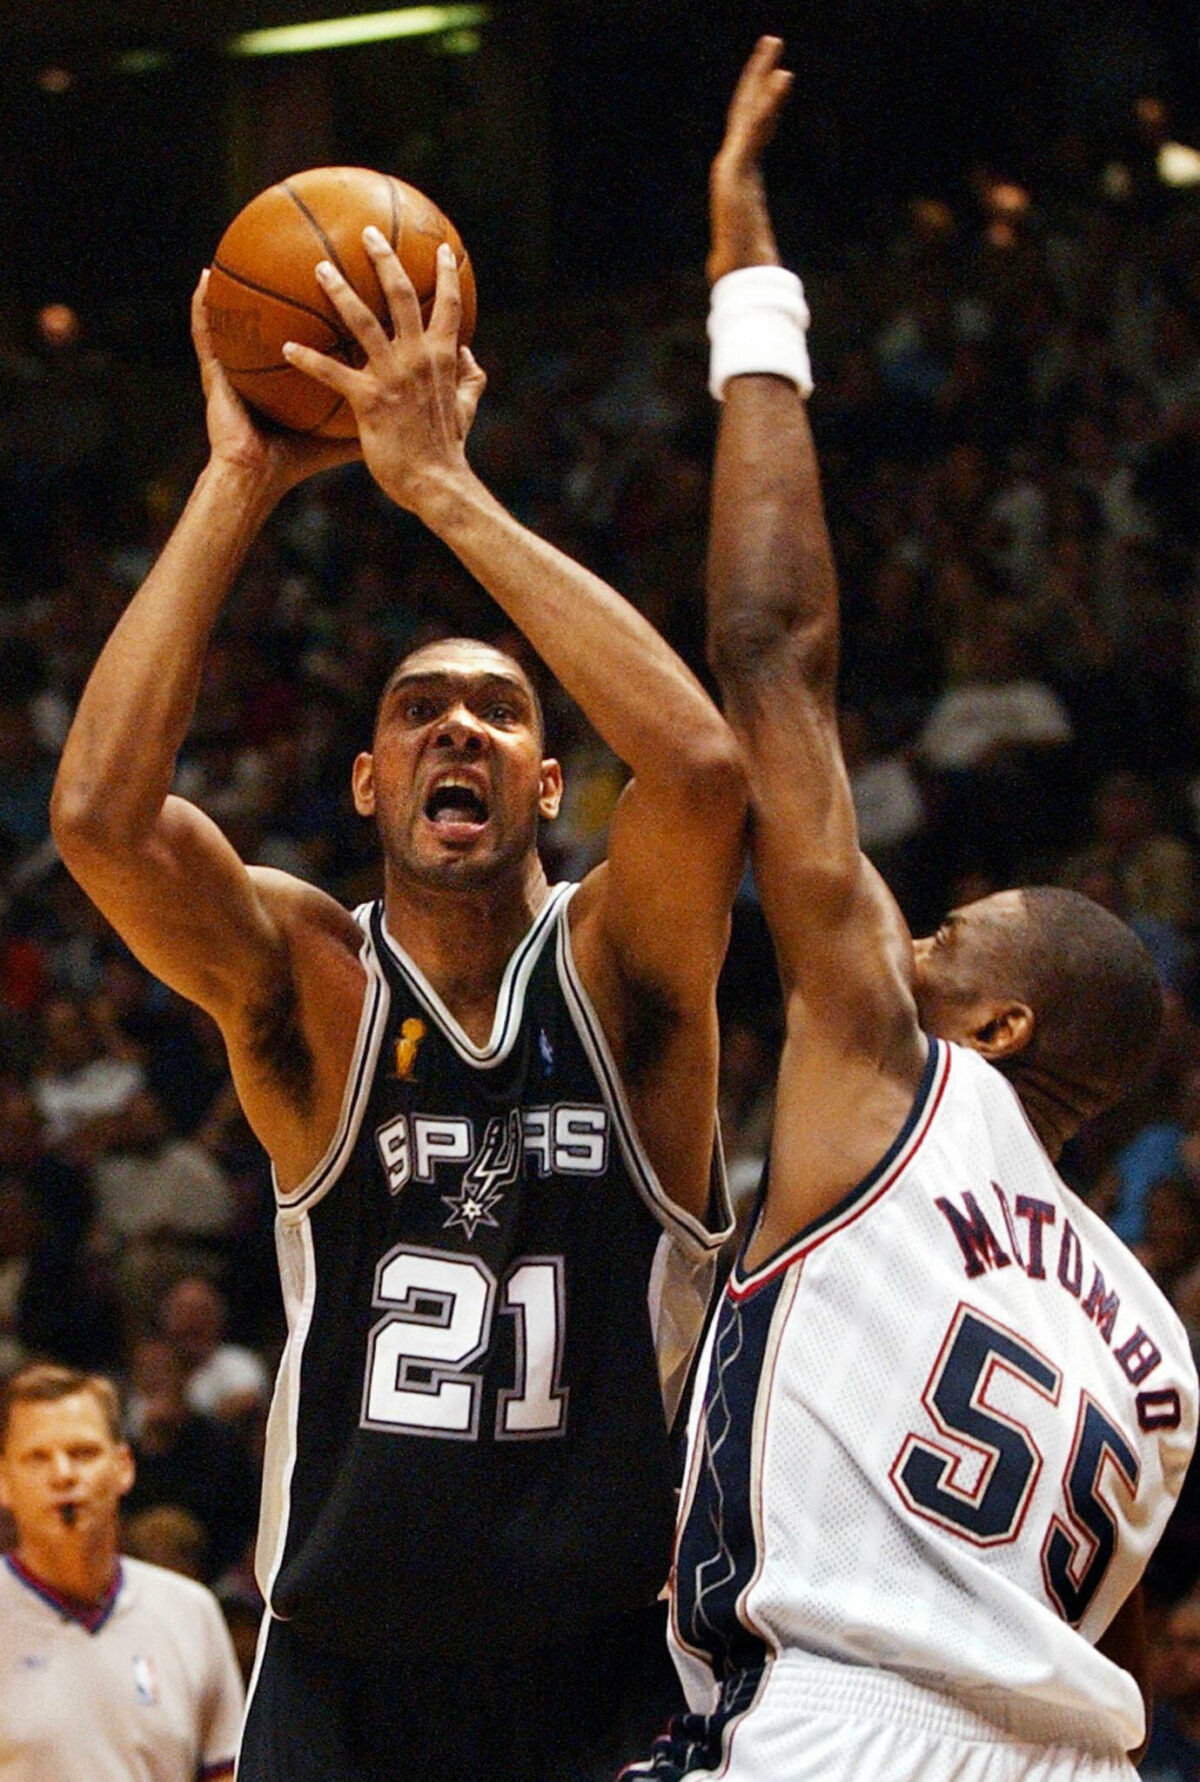 Which NBA players had the most blocks in their career?